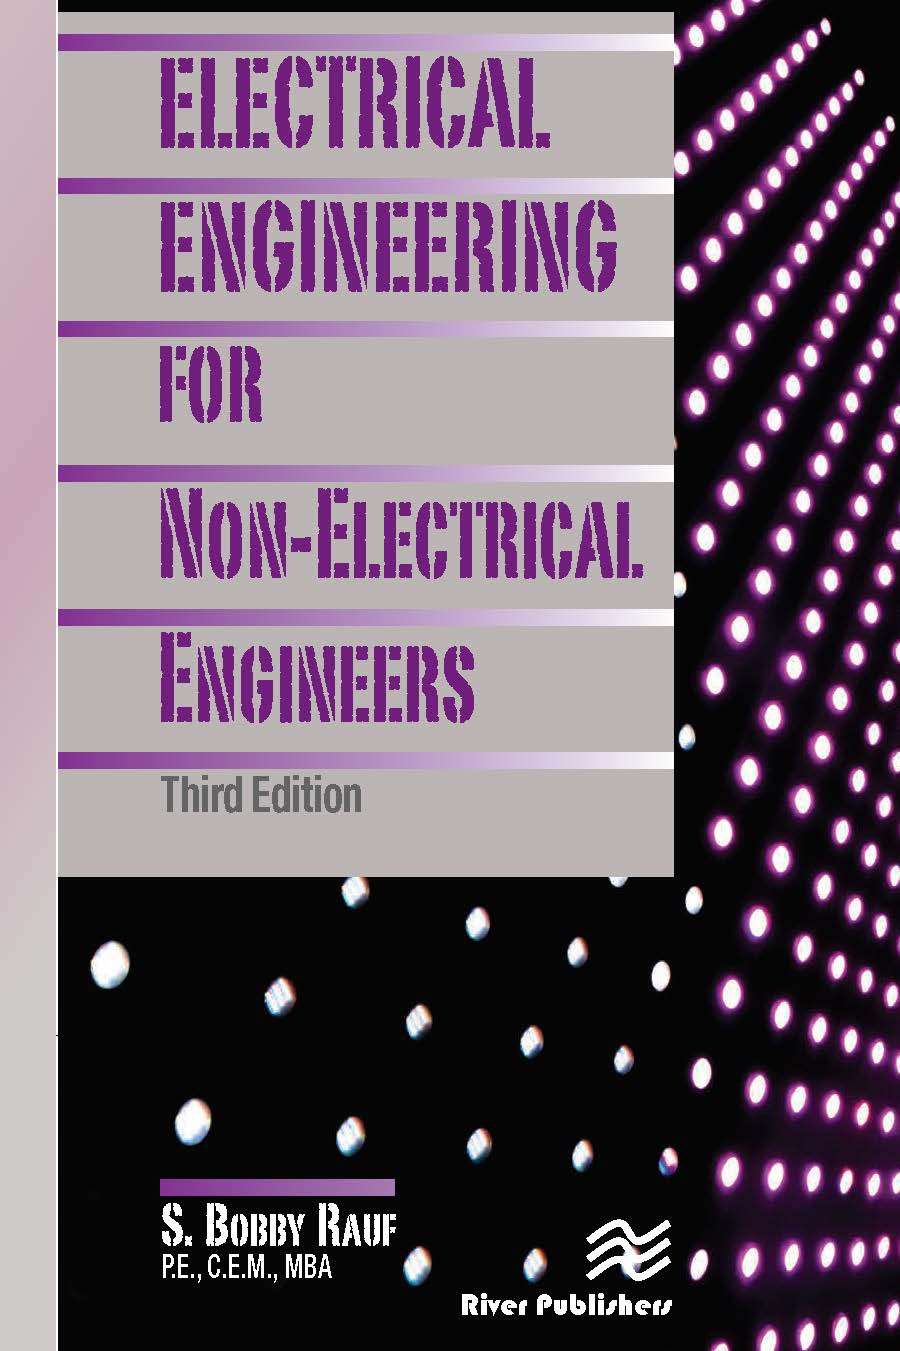 Electrical Engineering for Non-Electrical Engineers, Third Edition